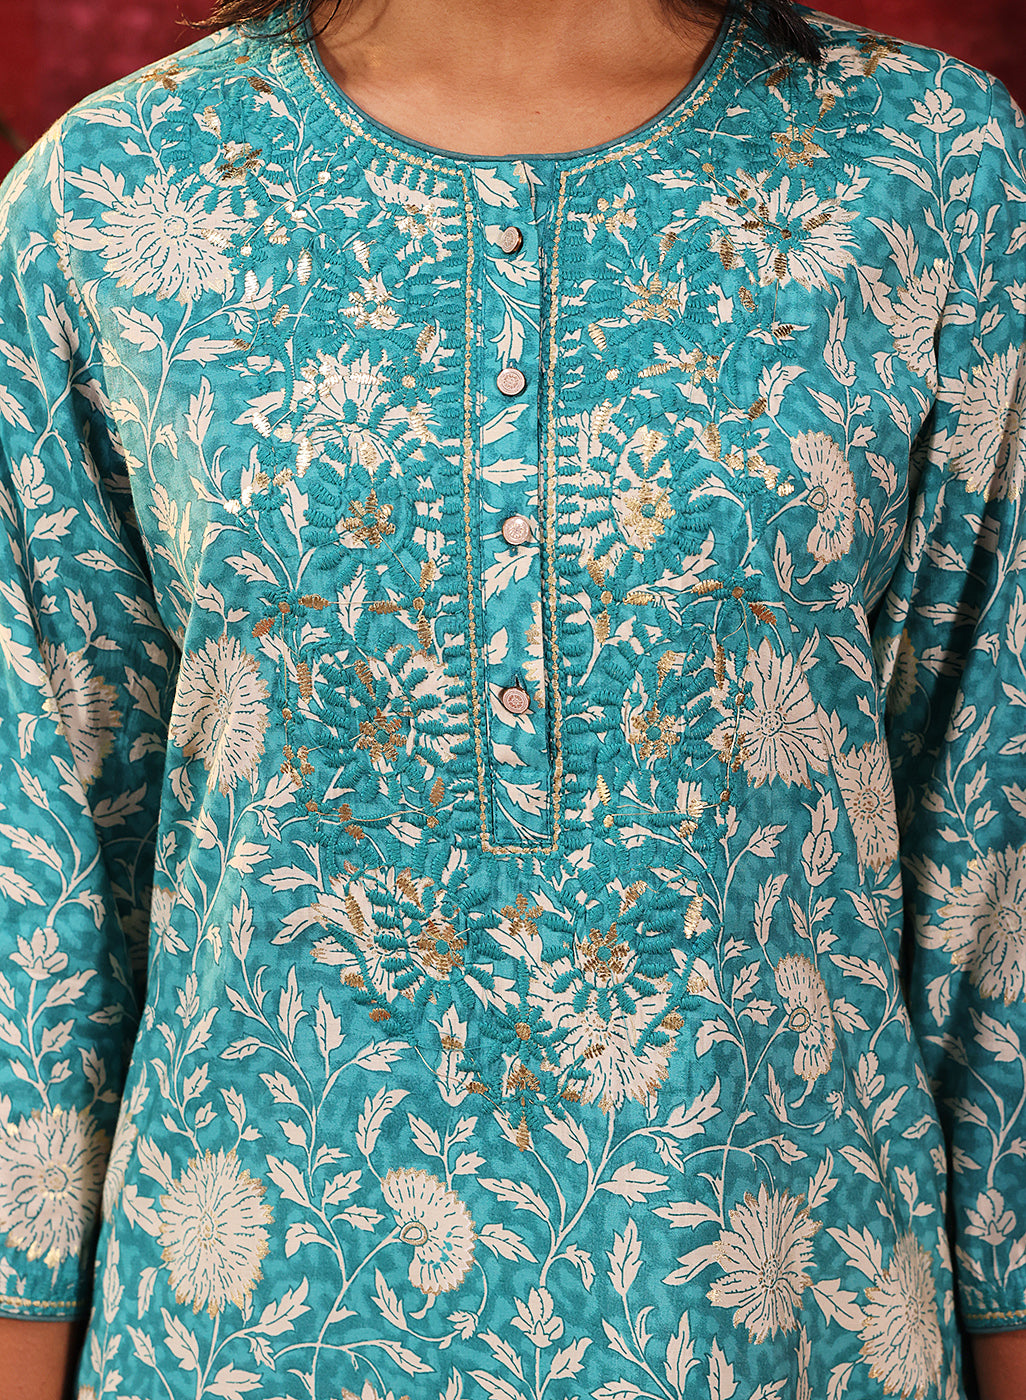 Bloom Teal Printed Cotton Tunic